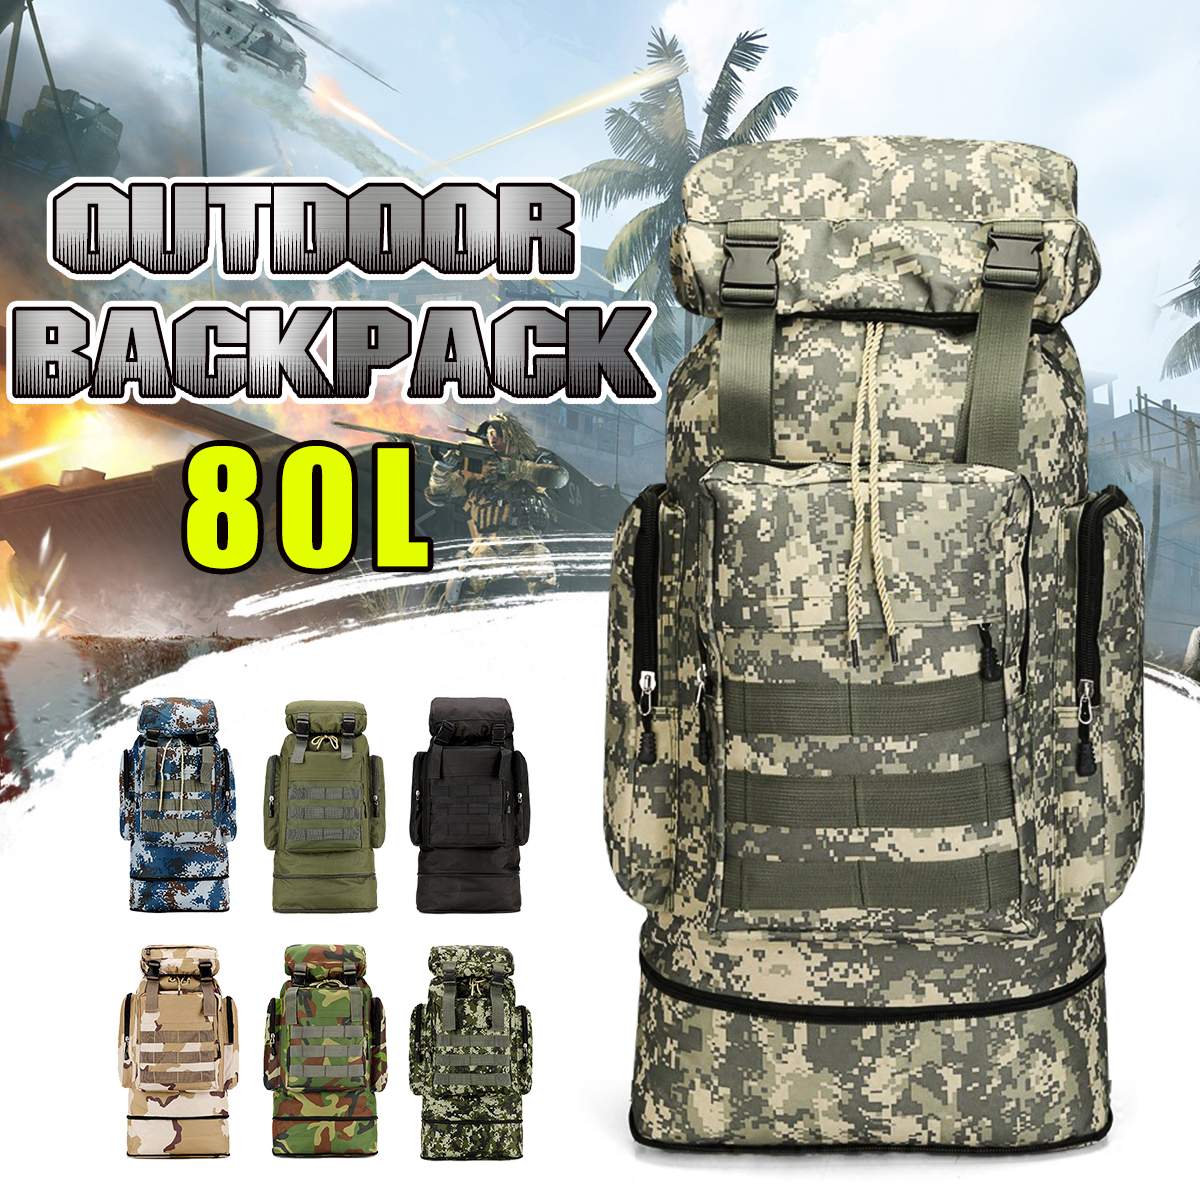 80L-Multi-Color-Large-Capacity-Waterproof-Tactical-Backpack-Outdoor-Travel-Hiking-Camping-Bag-1650714-1